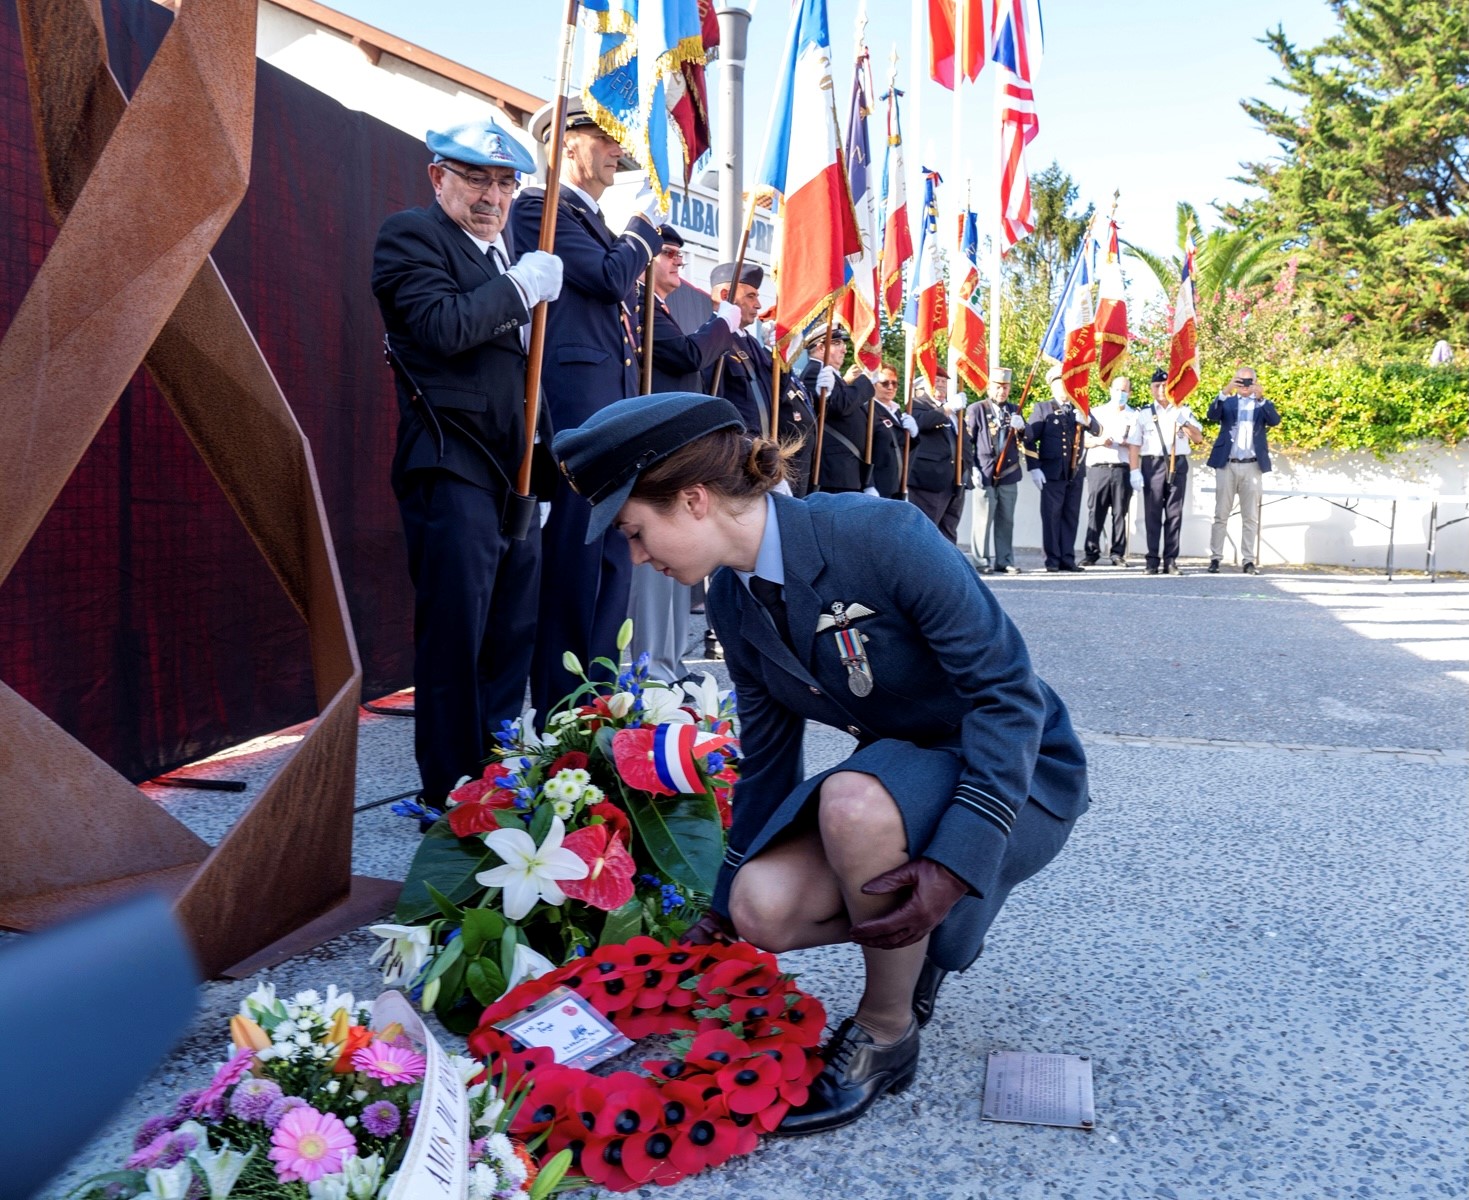 Personnel lays a wreath with flag bearers in the background.